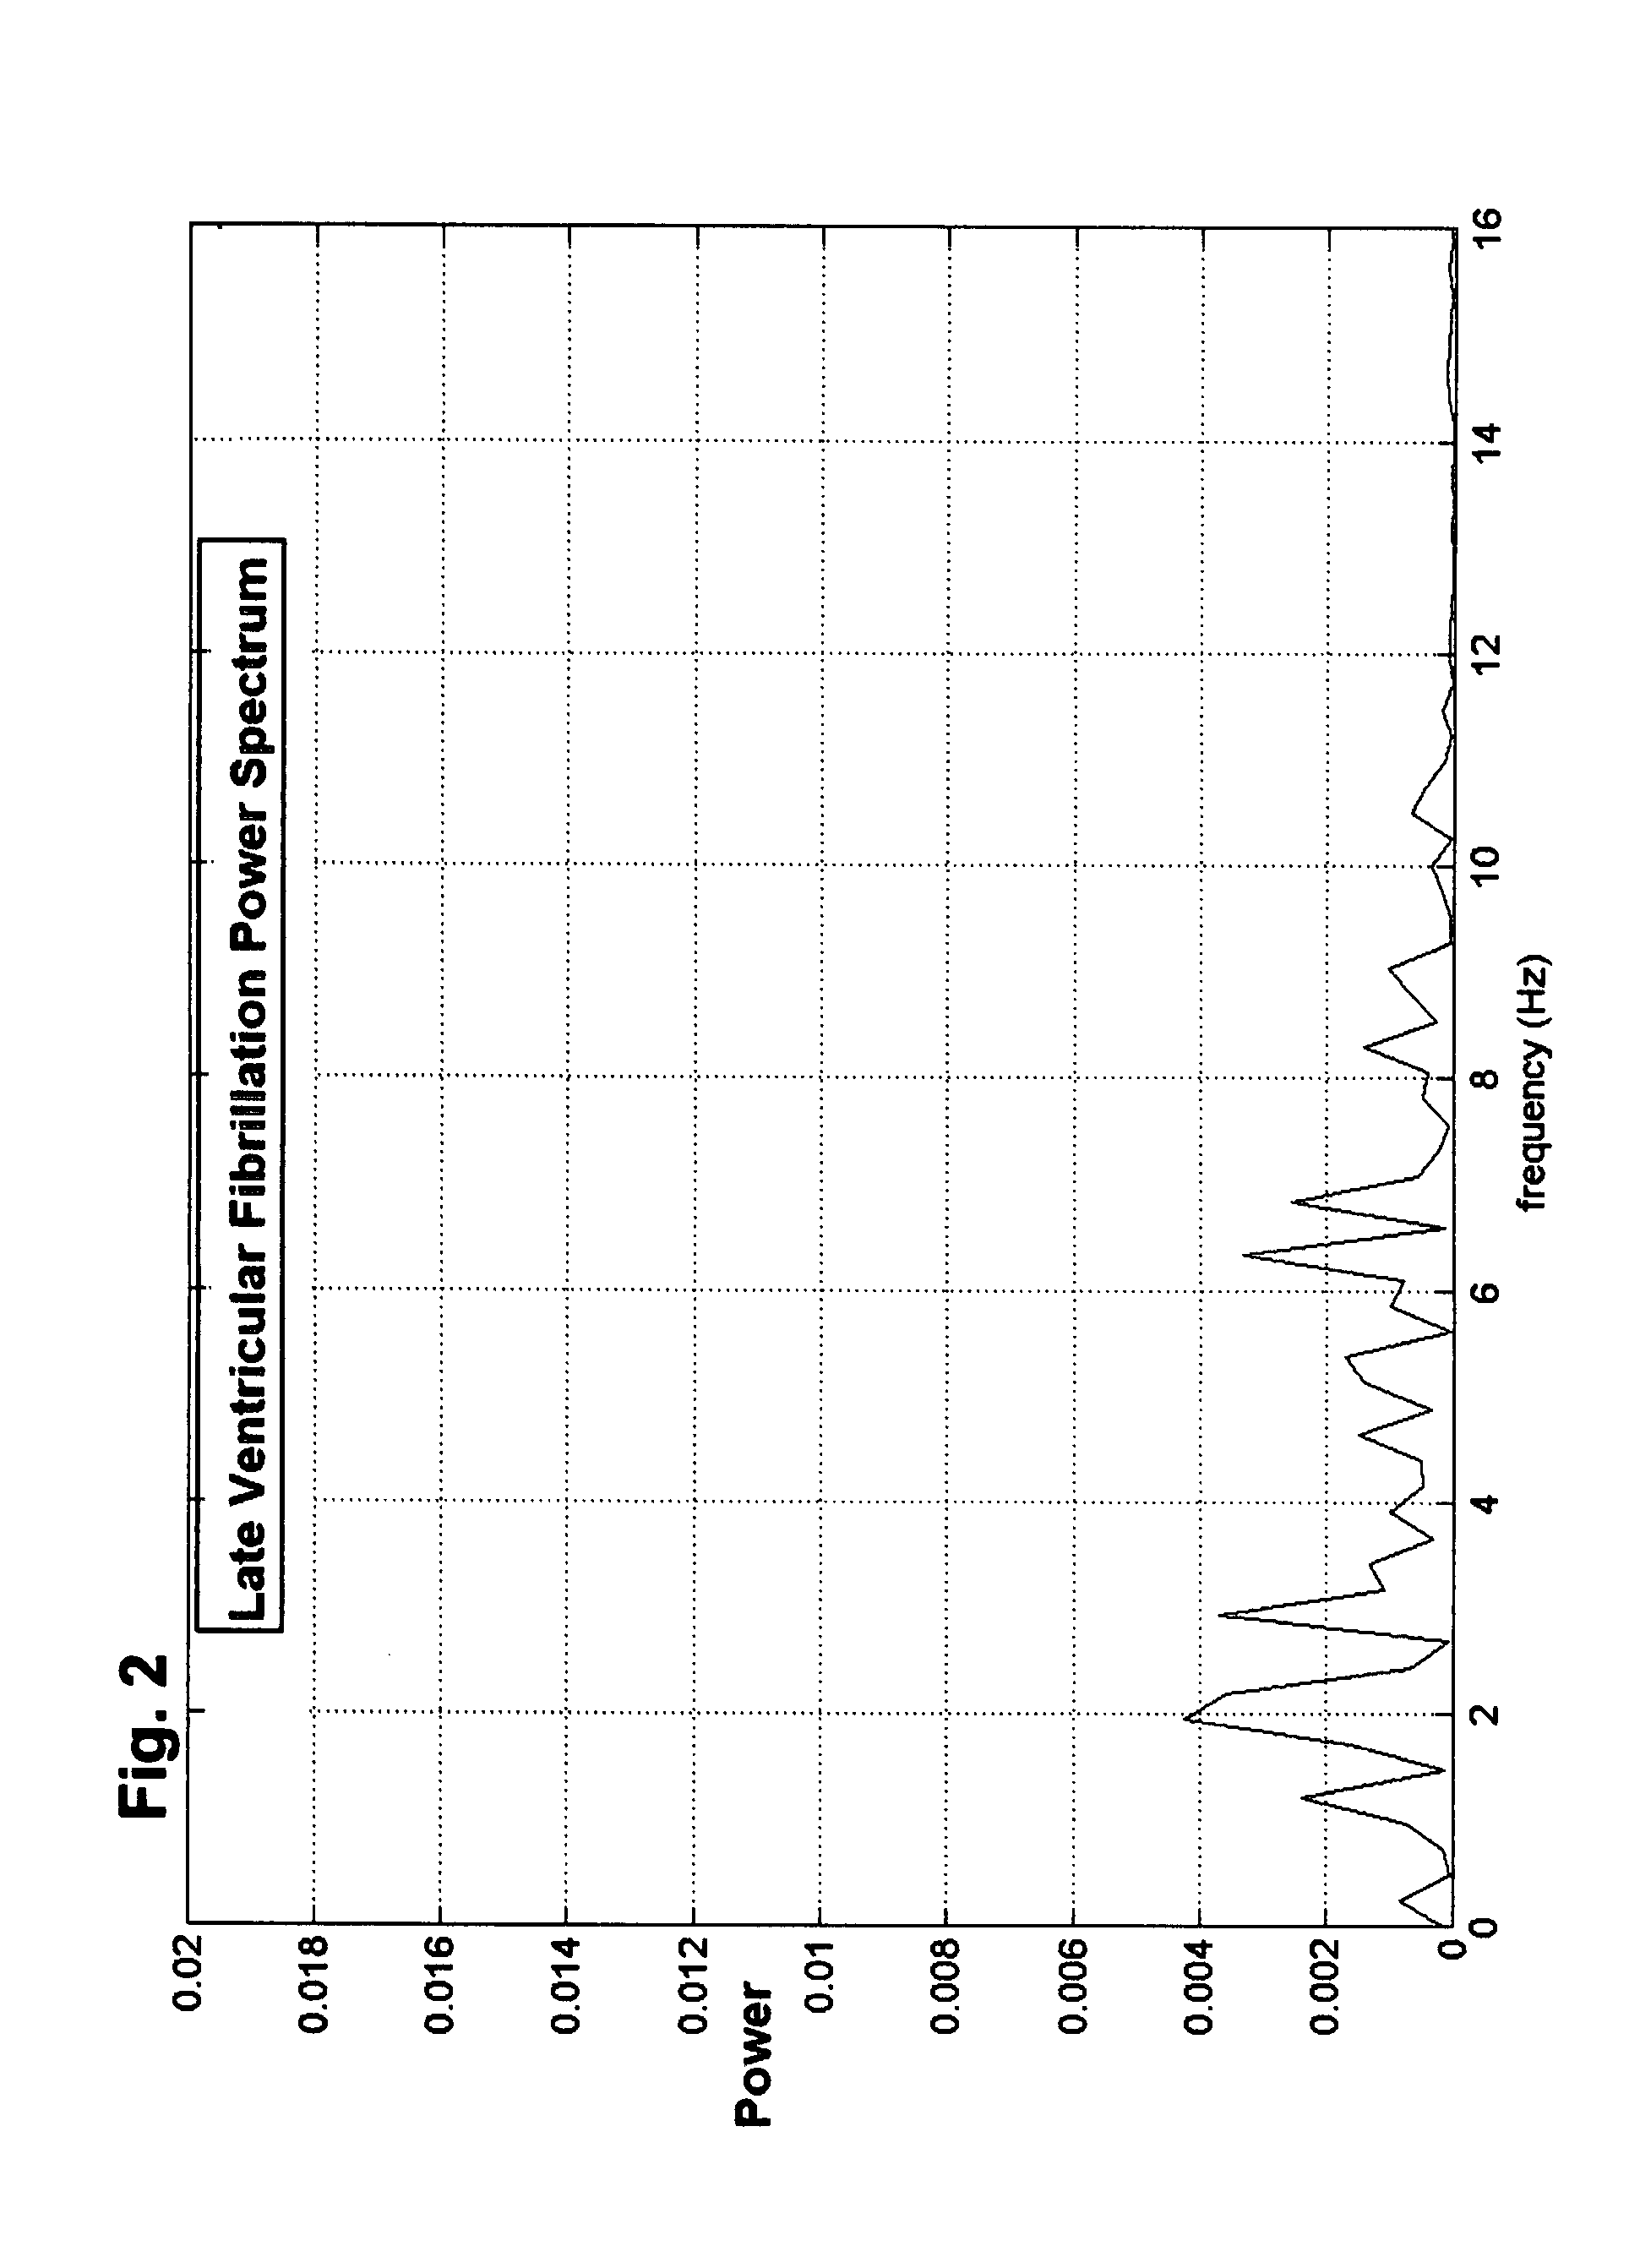 Methods and devices to guide therapy for ventricular fibrillation based on waveform analysis and survival benefit analysis